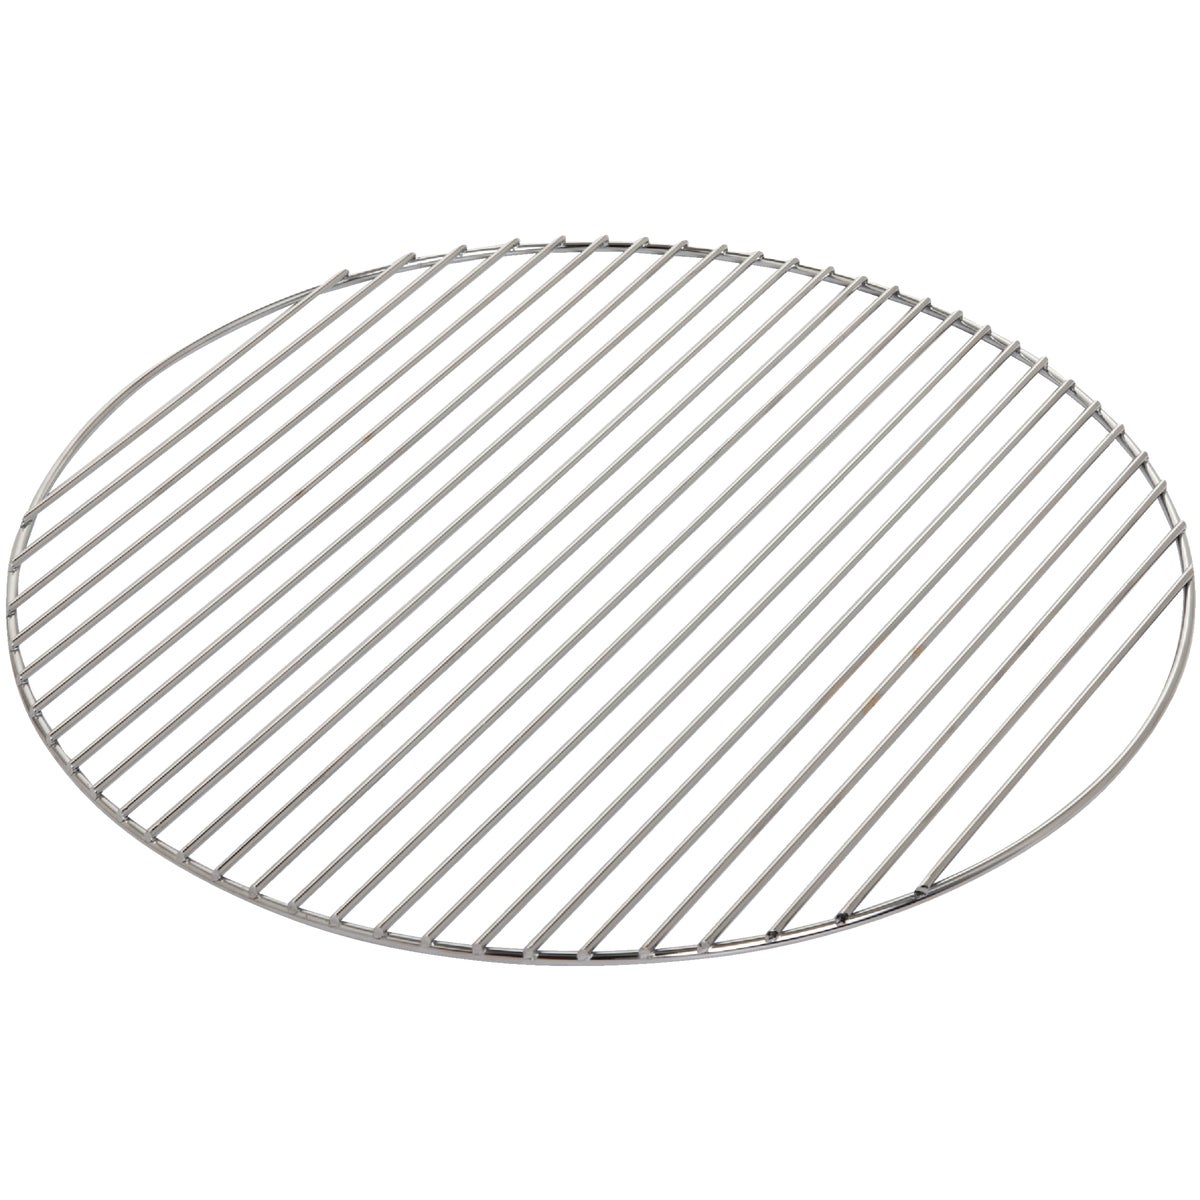 Old Smokey 20.9 In. Aluminized Steel Top Grill Grate